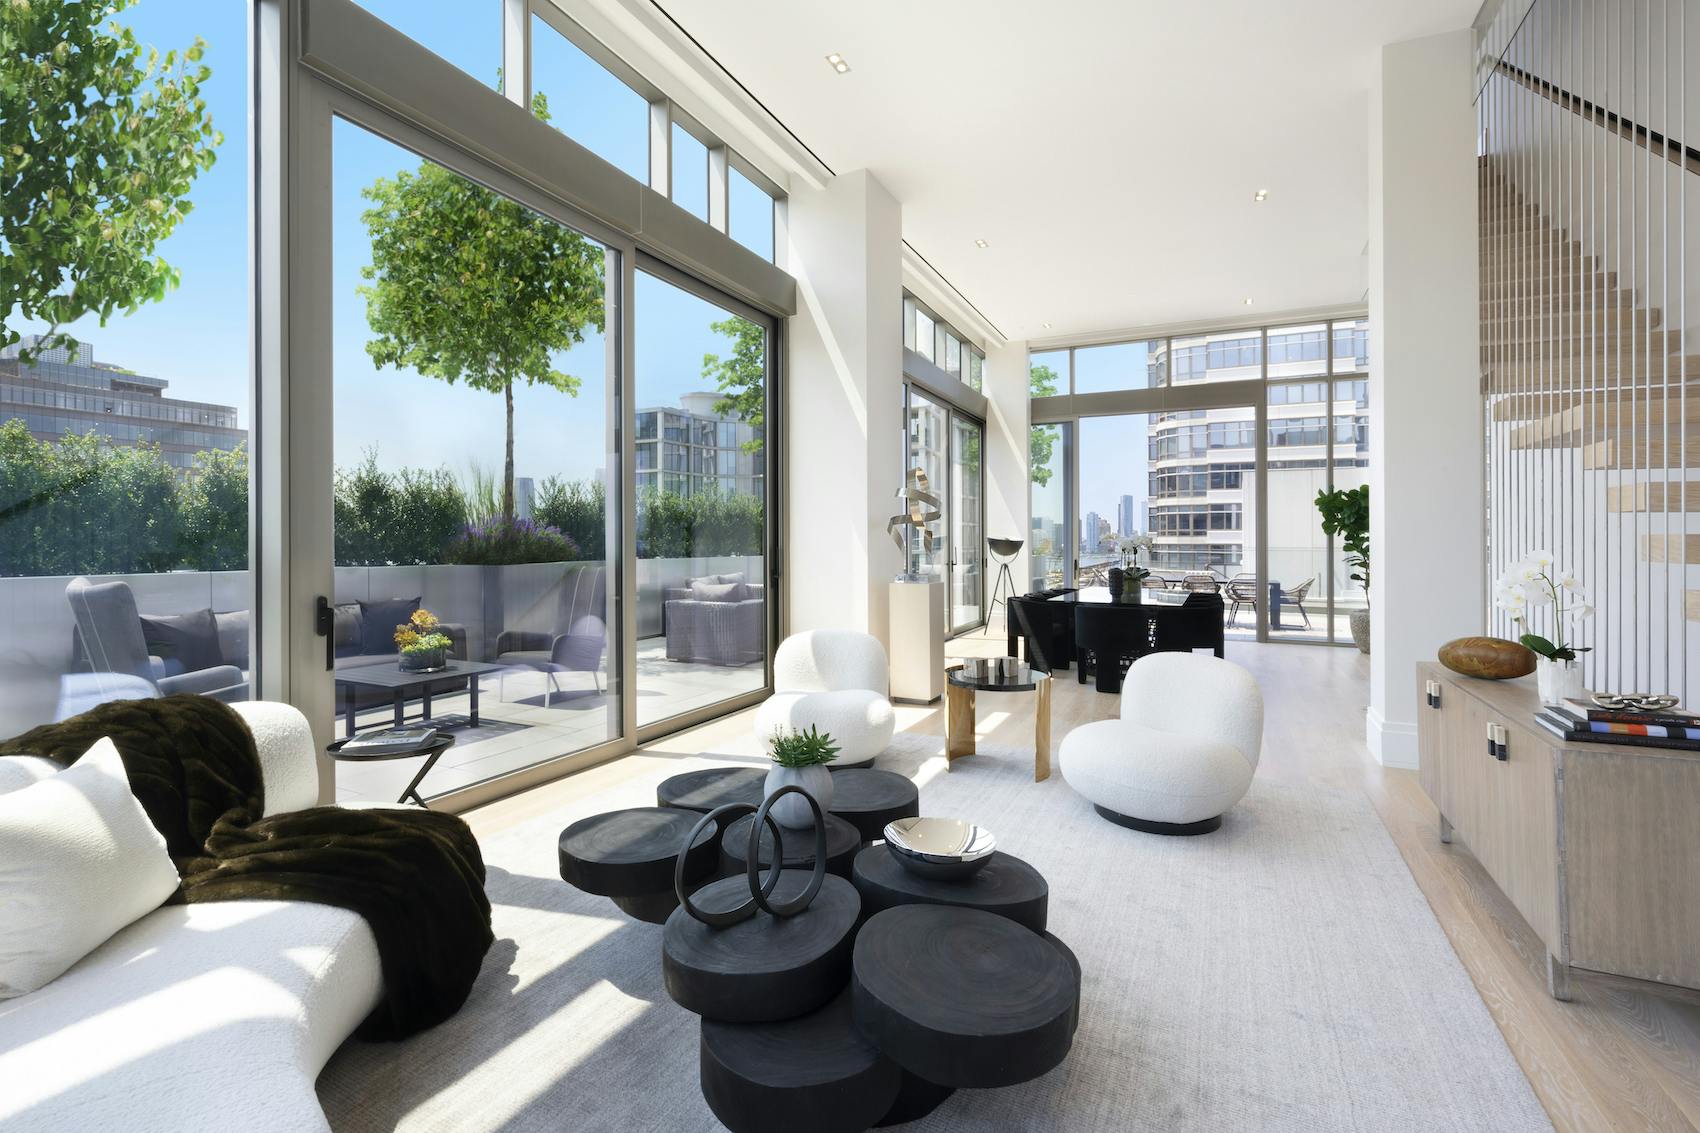 Meridith-Baer-Home-Home-Staging-New-York-Penthouse-West-Highrise-Condos-and-Lofts-Modern-and-Contemporary-Living-Room-Full-View